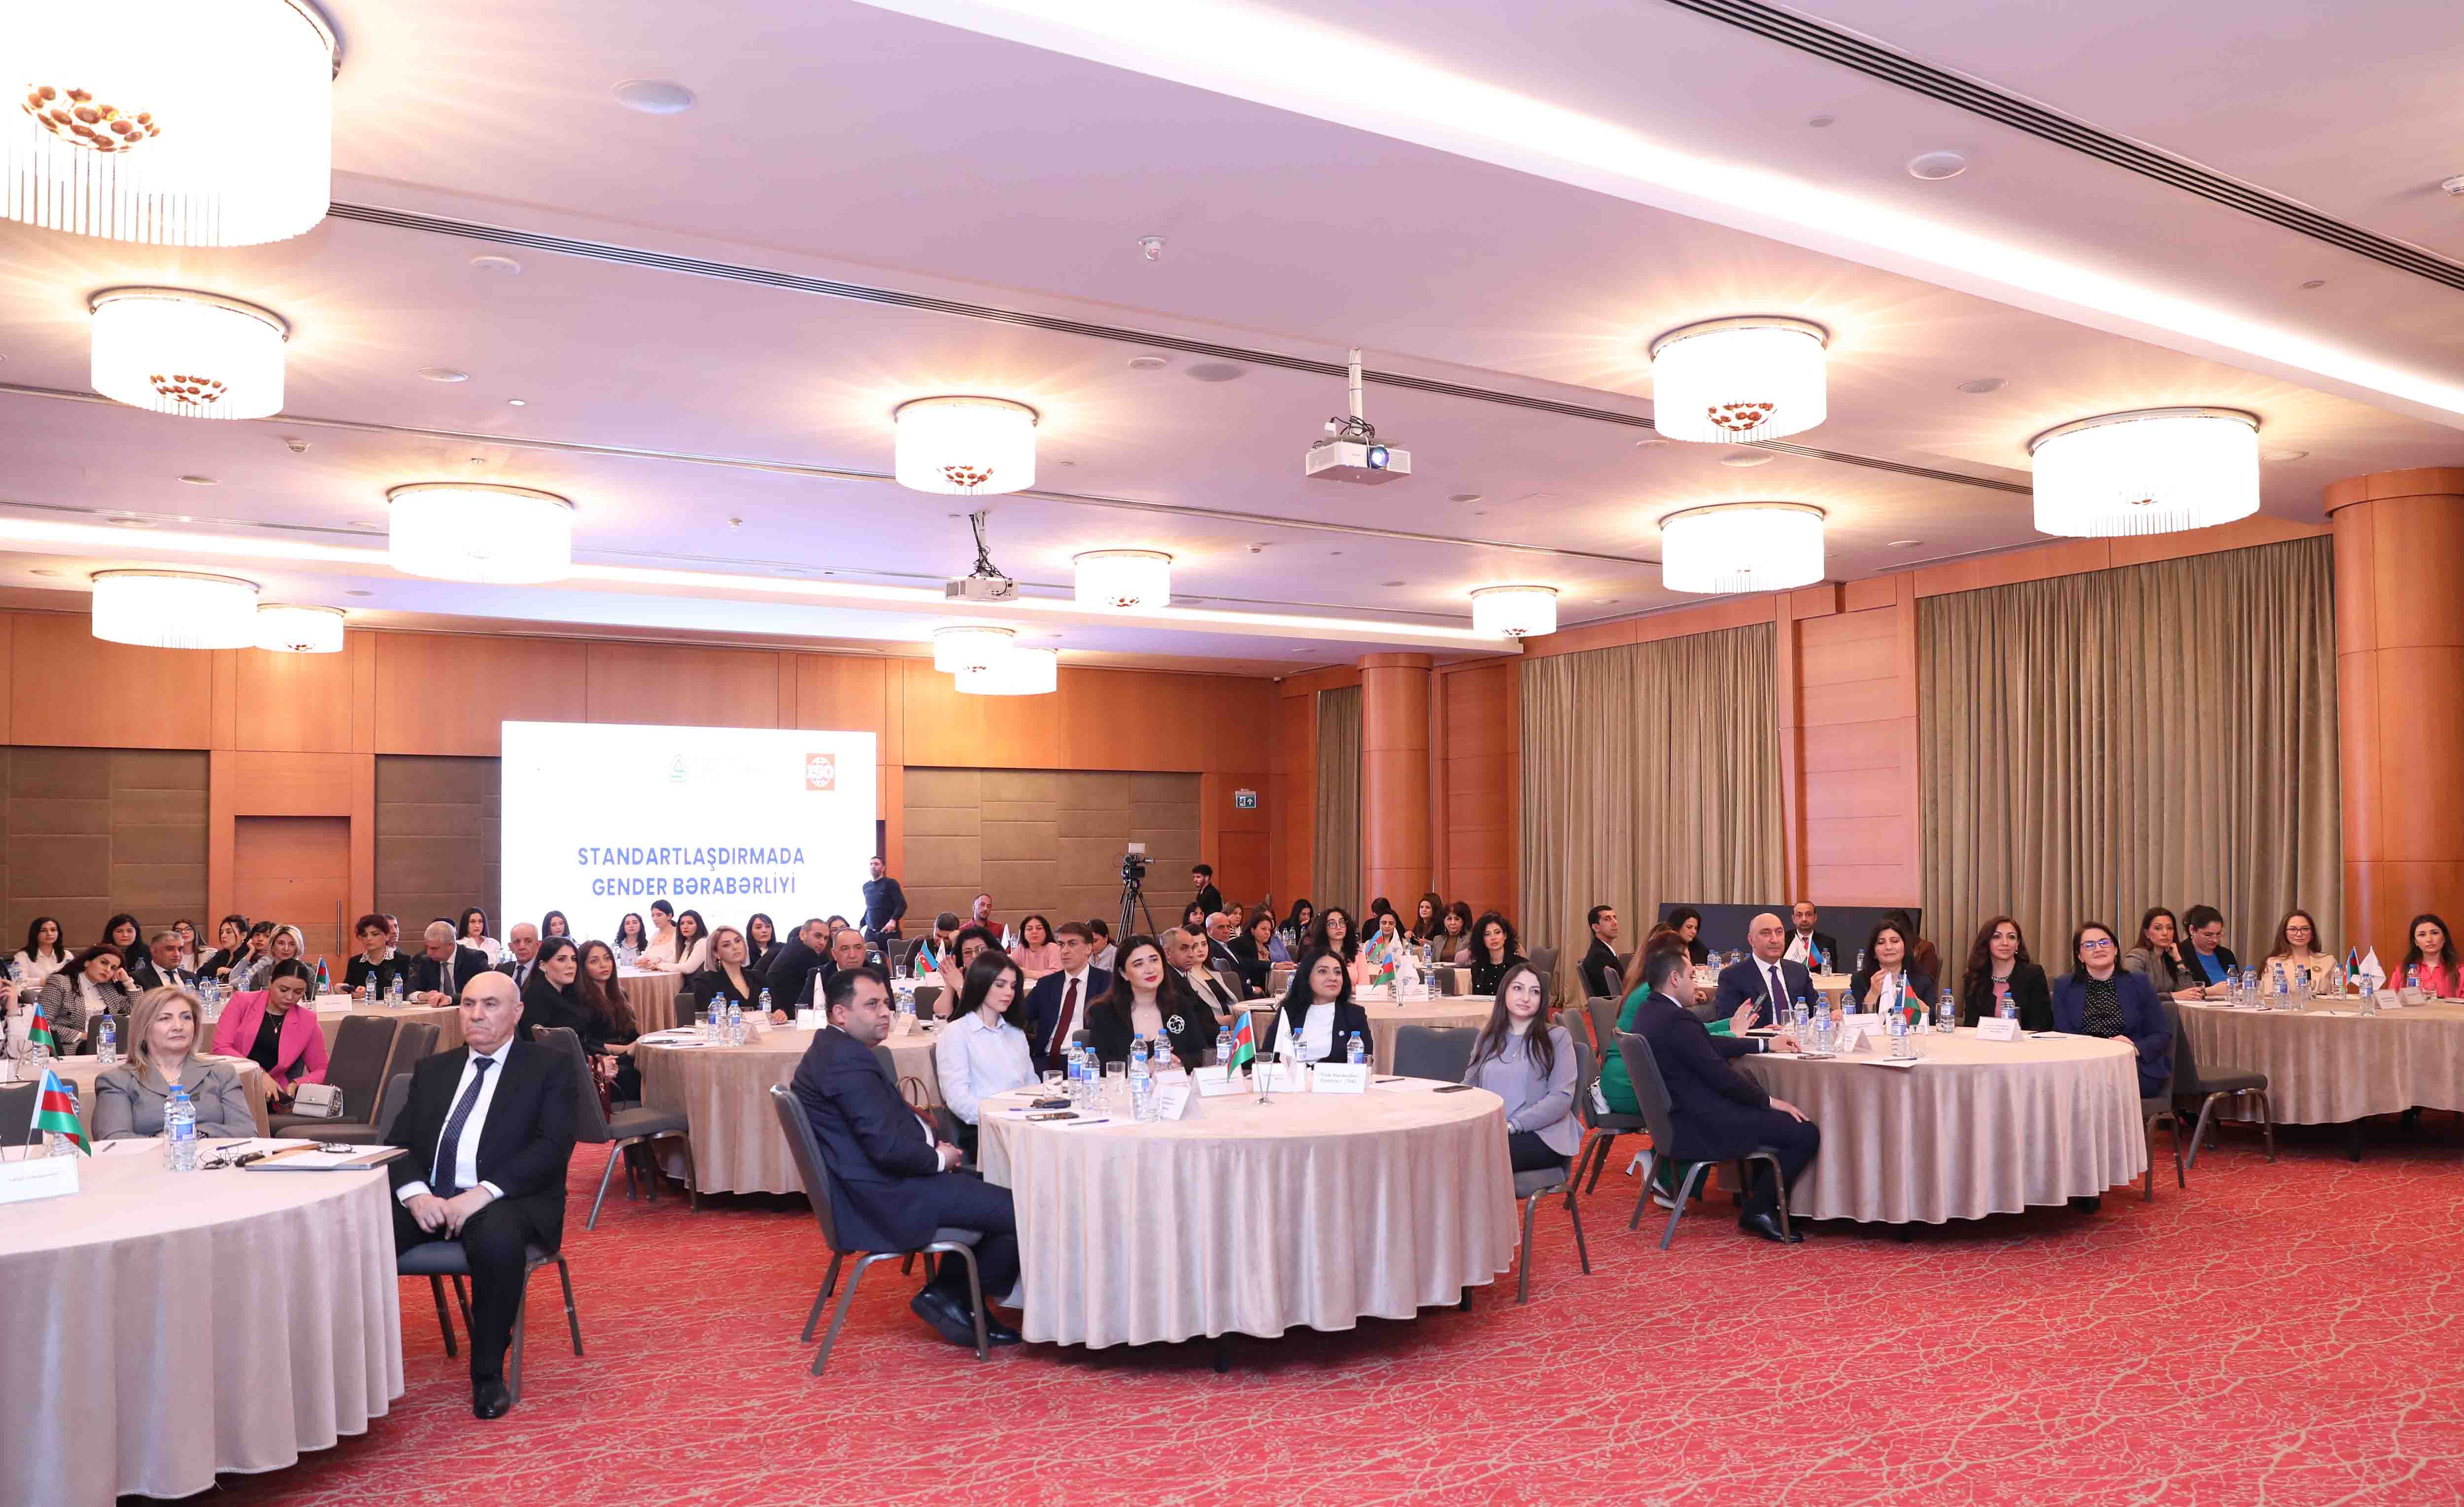 An event centered on the theme of "Gender Equality in Standardization" was convened.